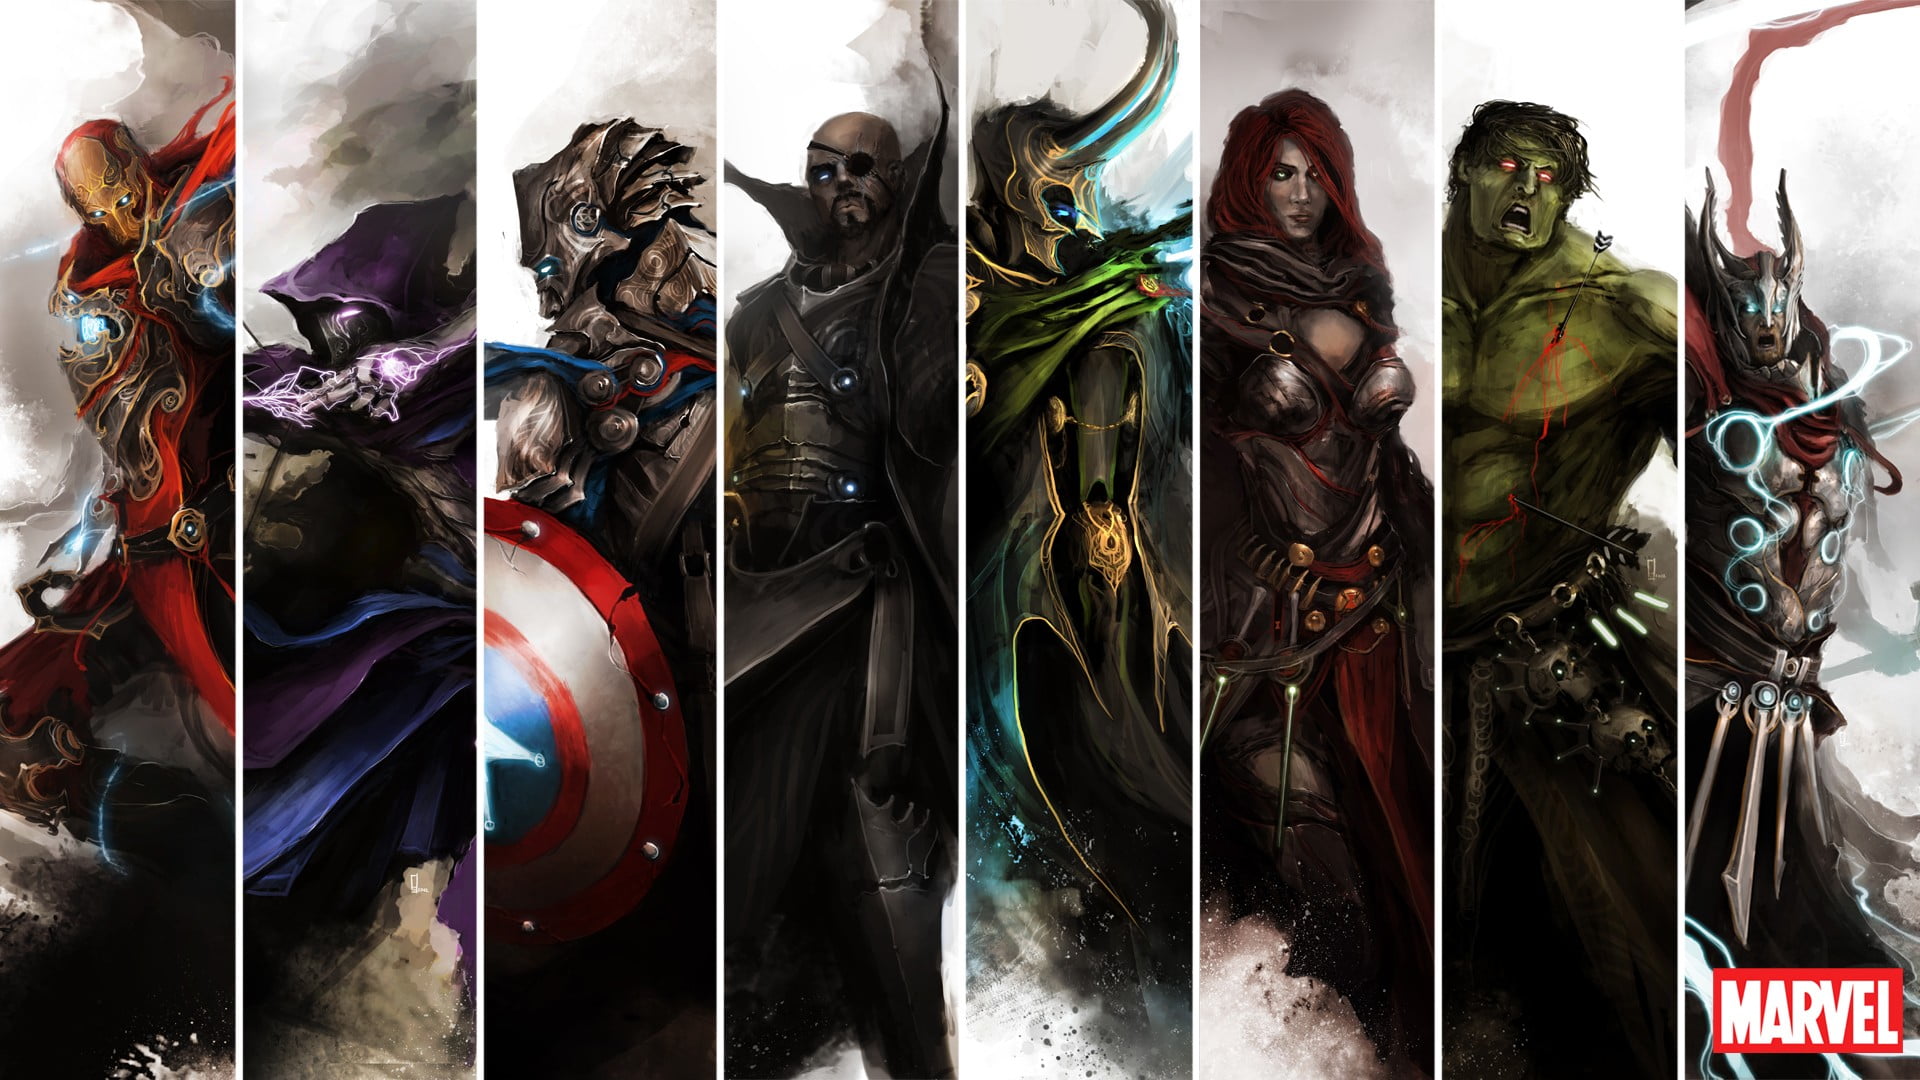 Marvel Characters collage wallpaper, Marvel poster, Marvel Comics